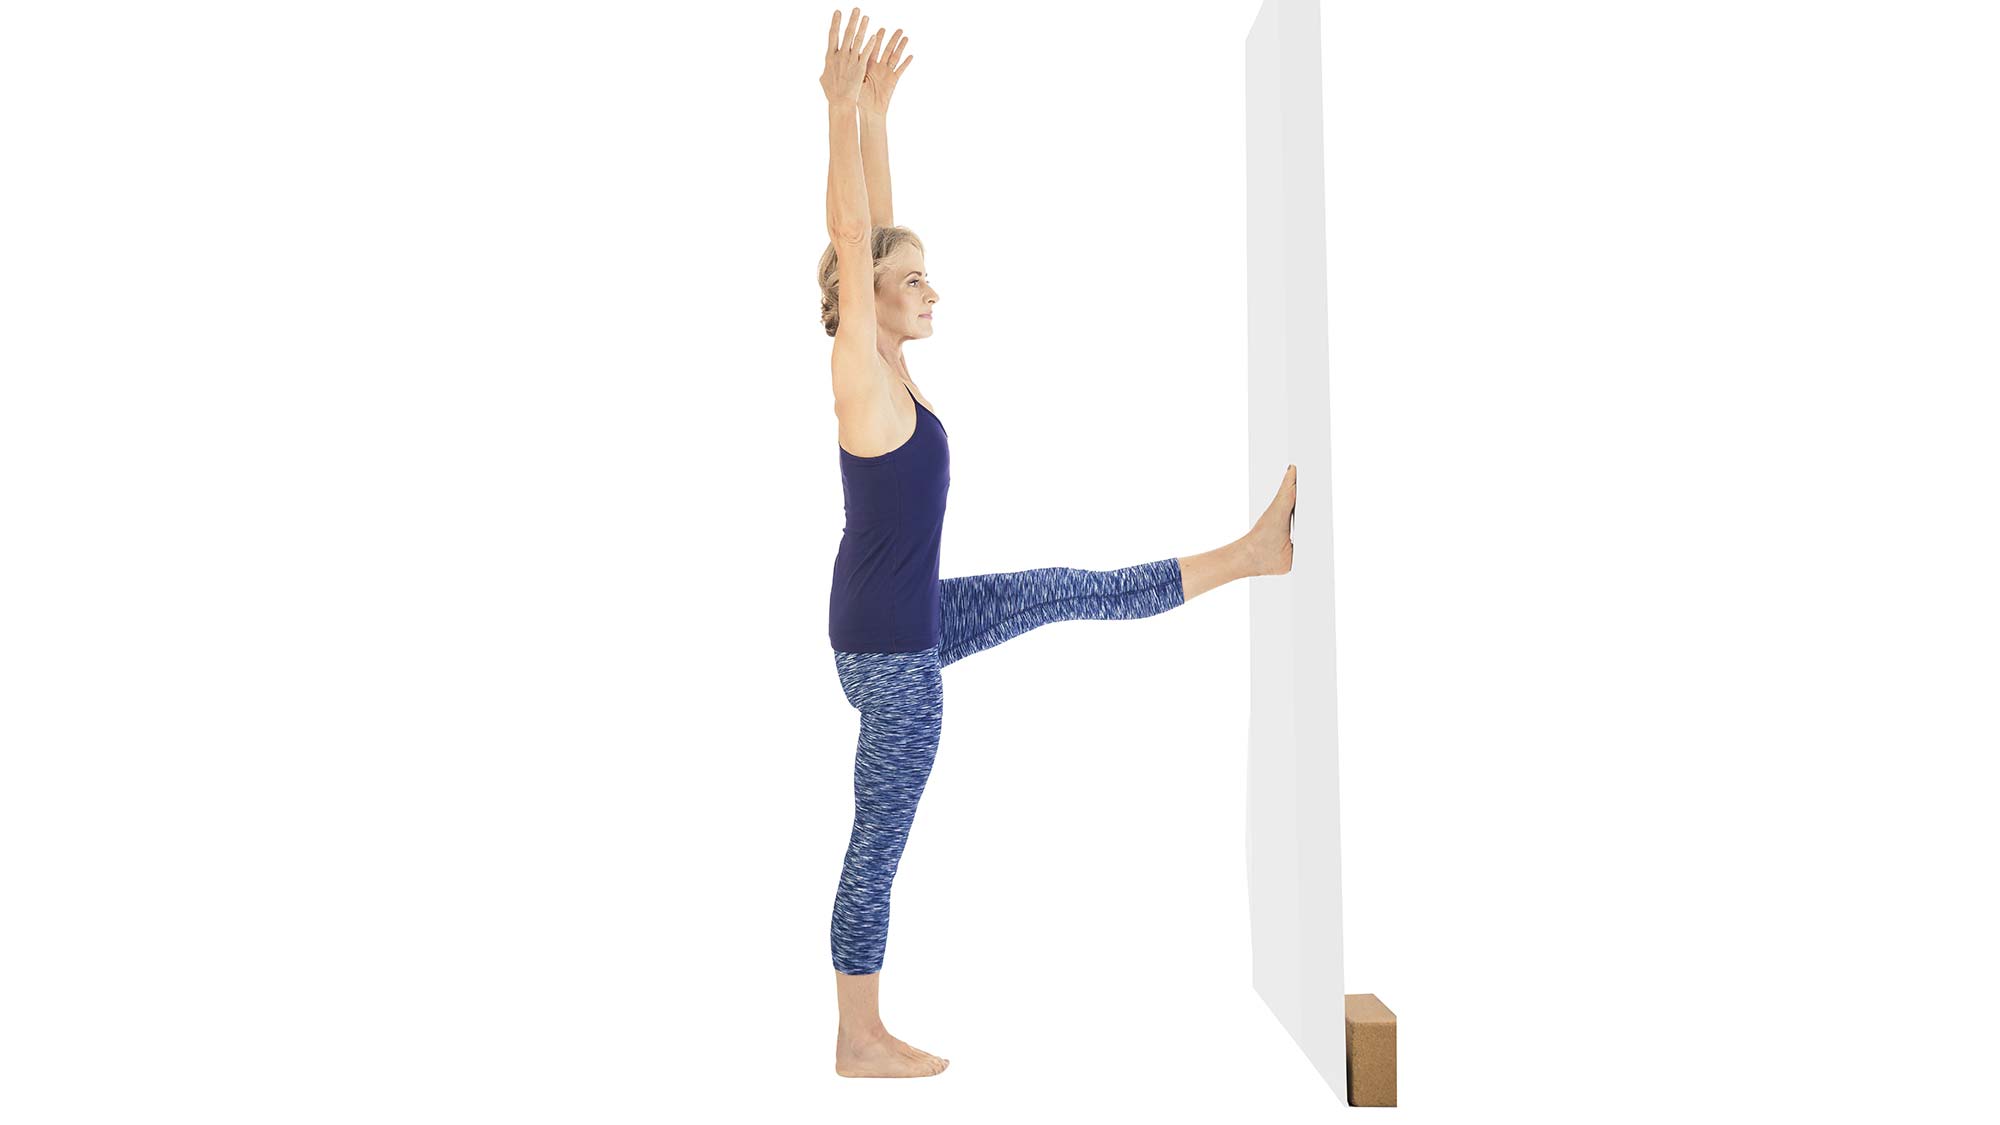 Two Fit Moms » Working for the Dream: Hanumanasana